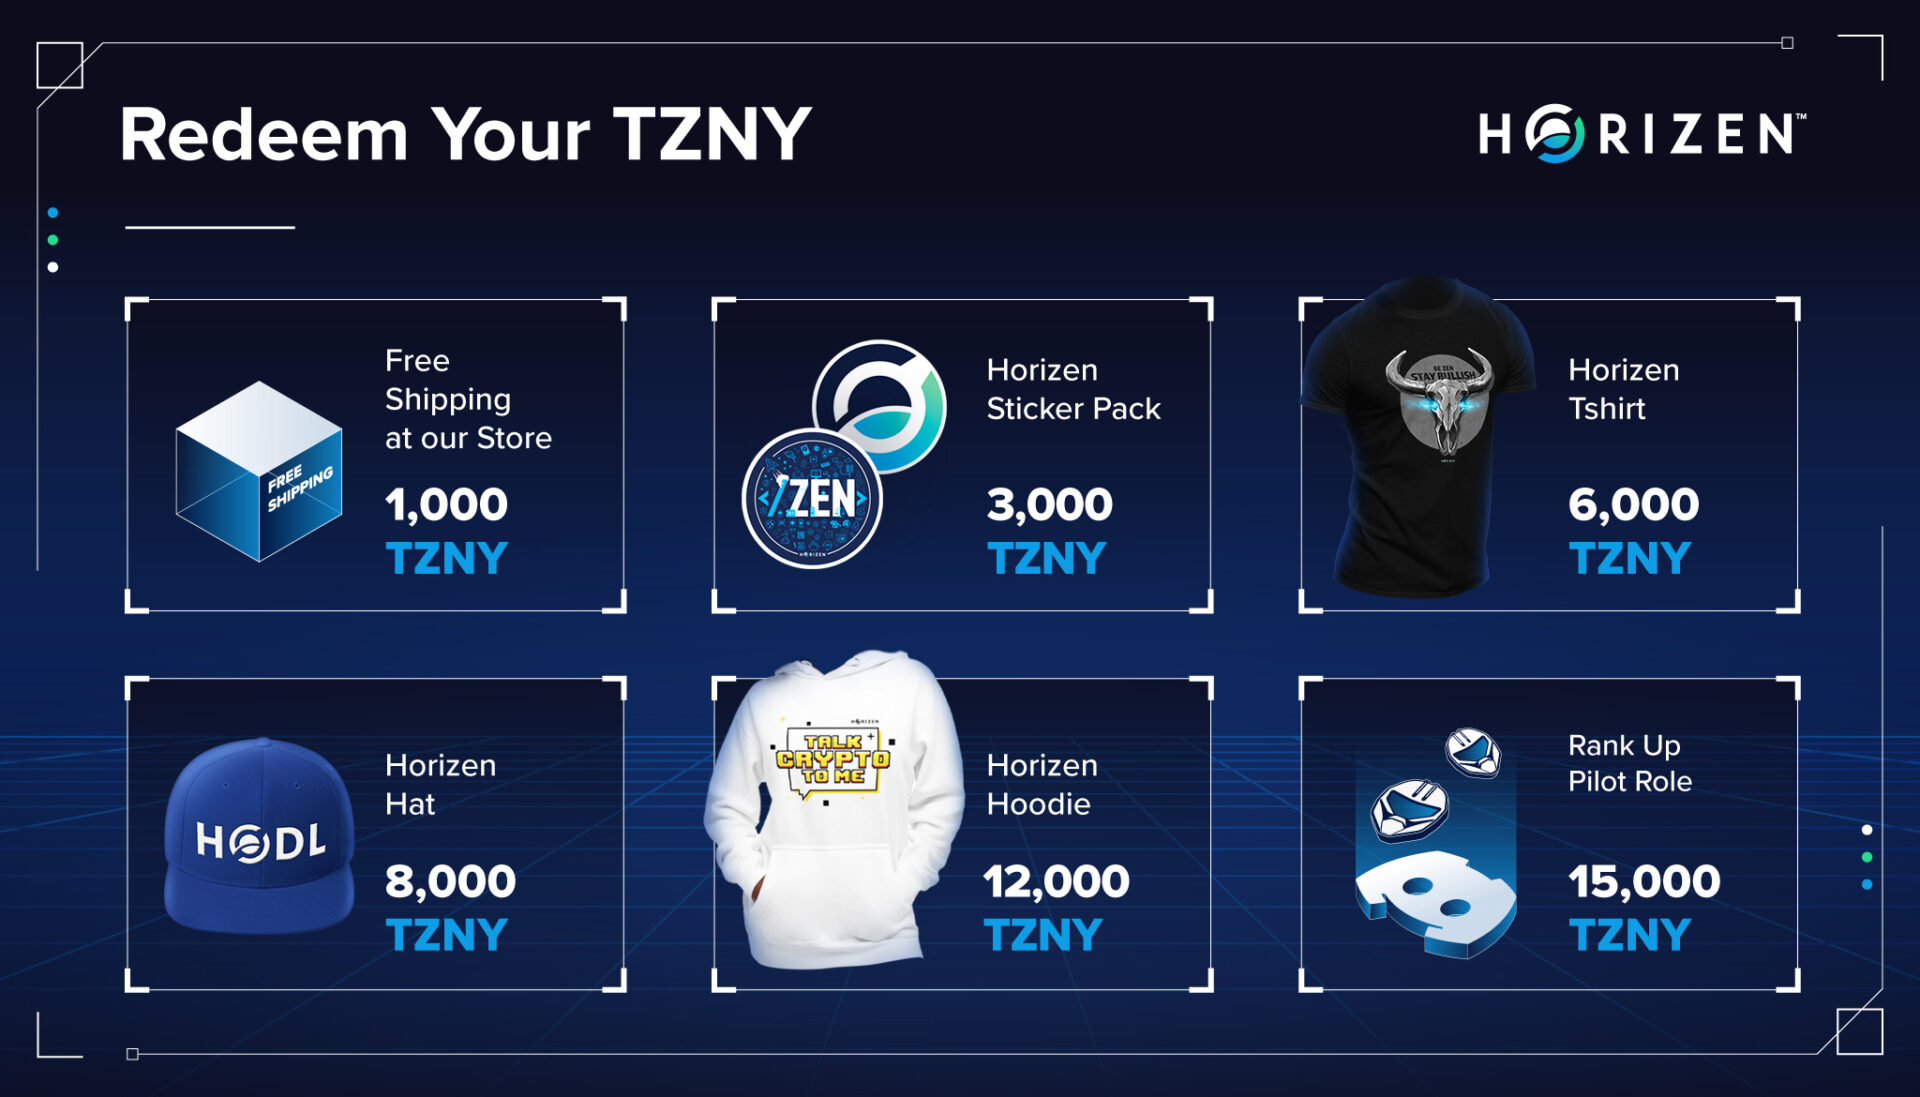 redeem-your-tzny-get-swag-and-more-horizen-blog